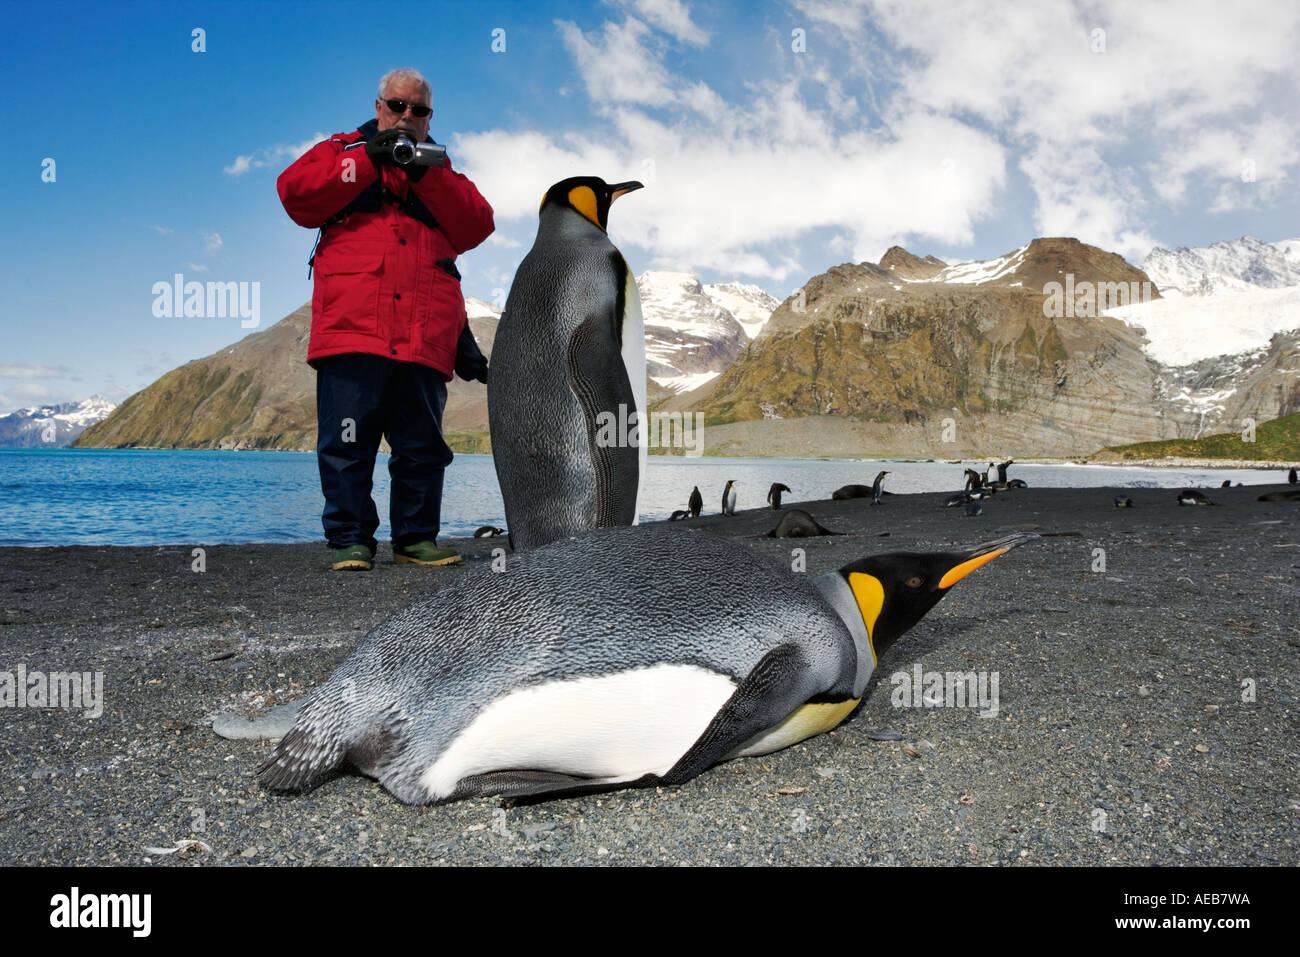 King penguins Aptenodytes patagonicus being photographed by tourists South Georgia. Dist Subantarctic Islands Stock Photo